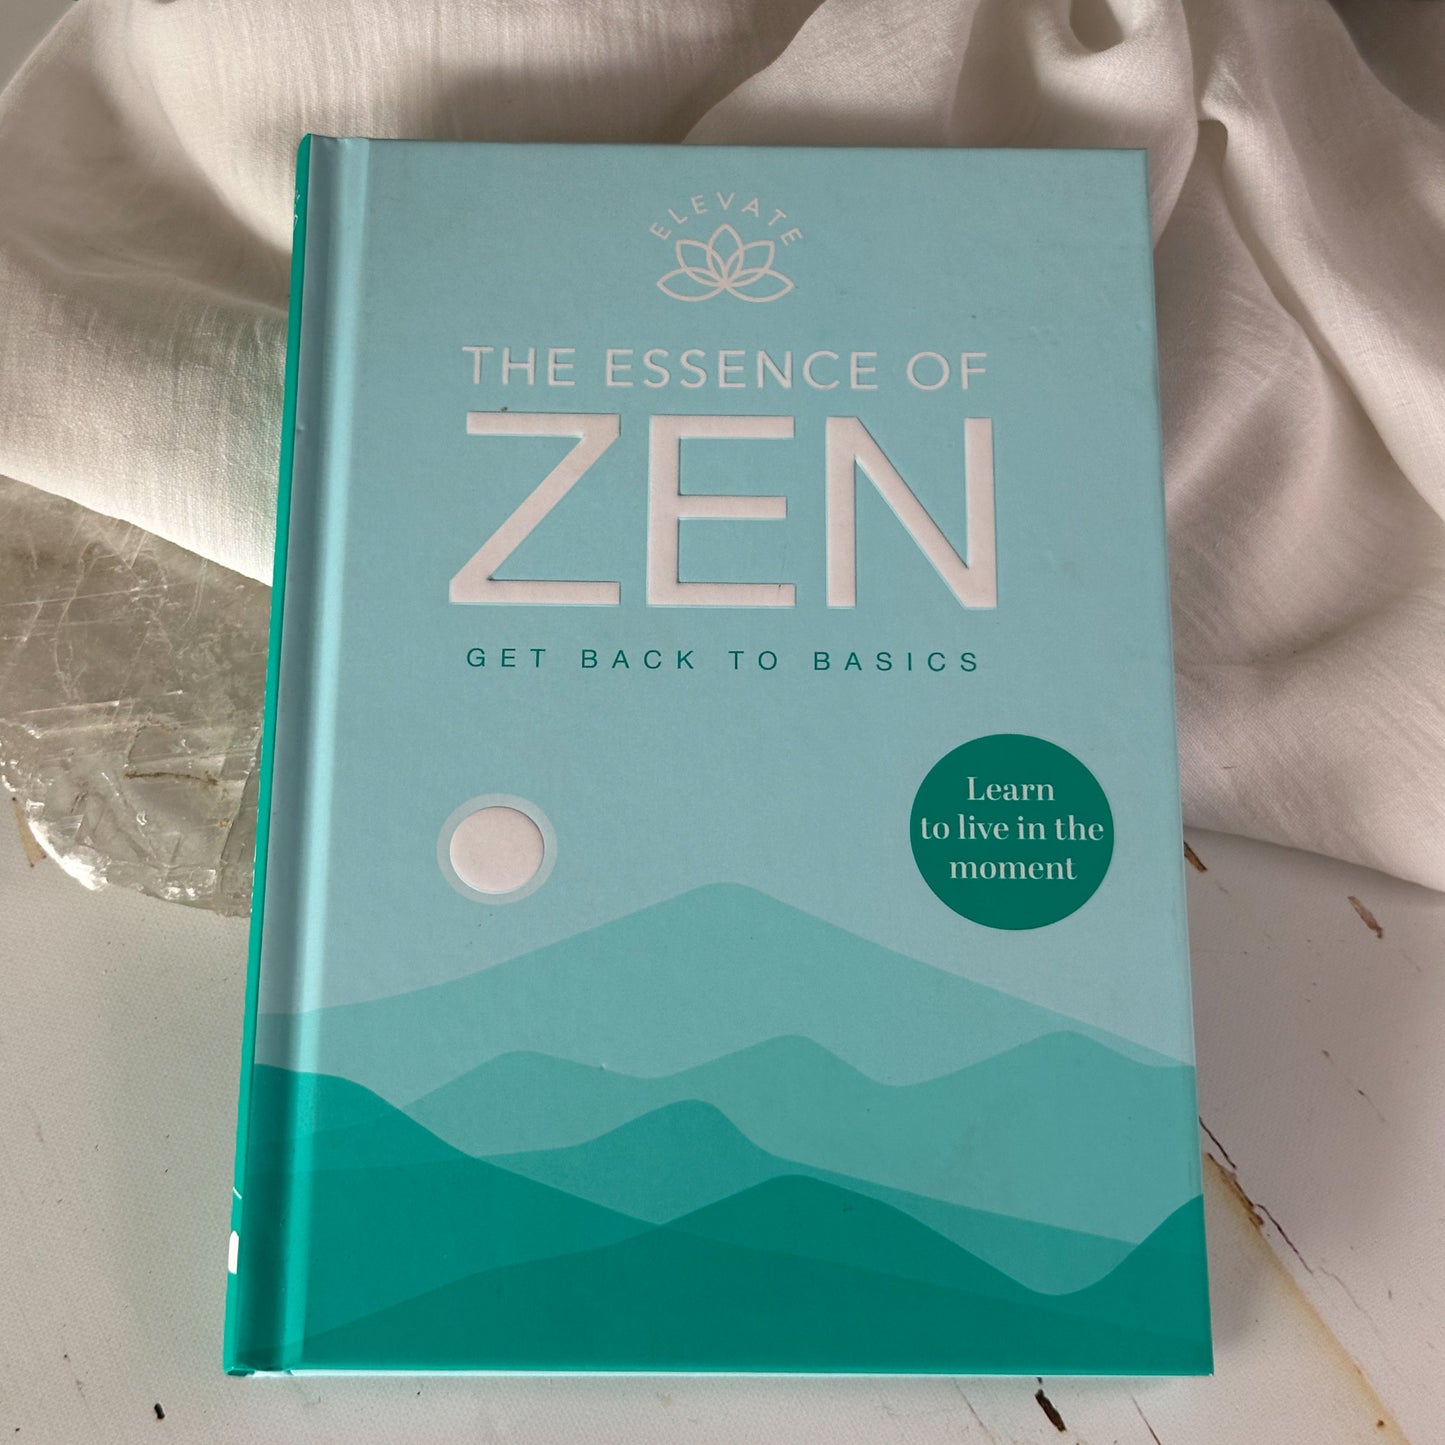 Elevate: The Essence of Zen - Get back to basics #723